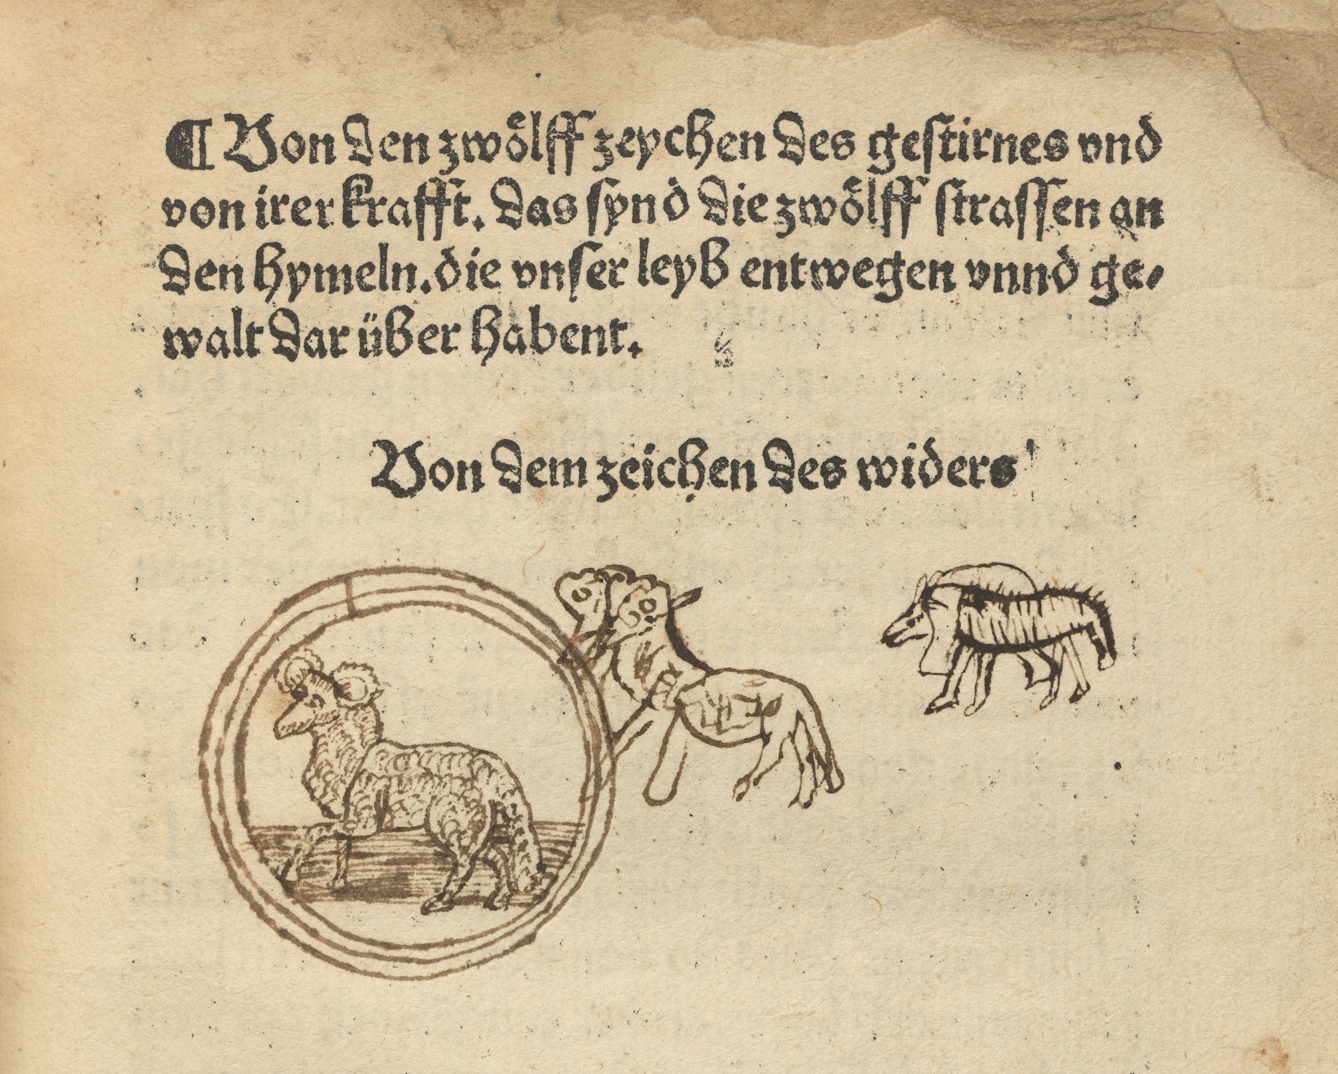 Photograph of a page from an early printed book where a previous owner has had a go at copying an illustration of a ram.